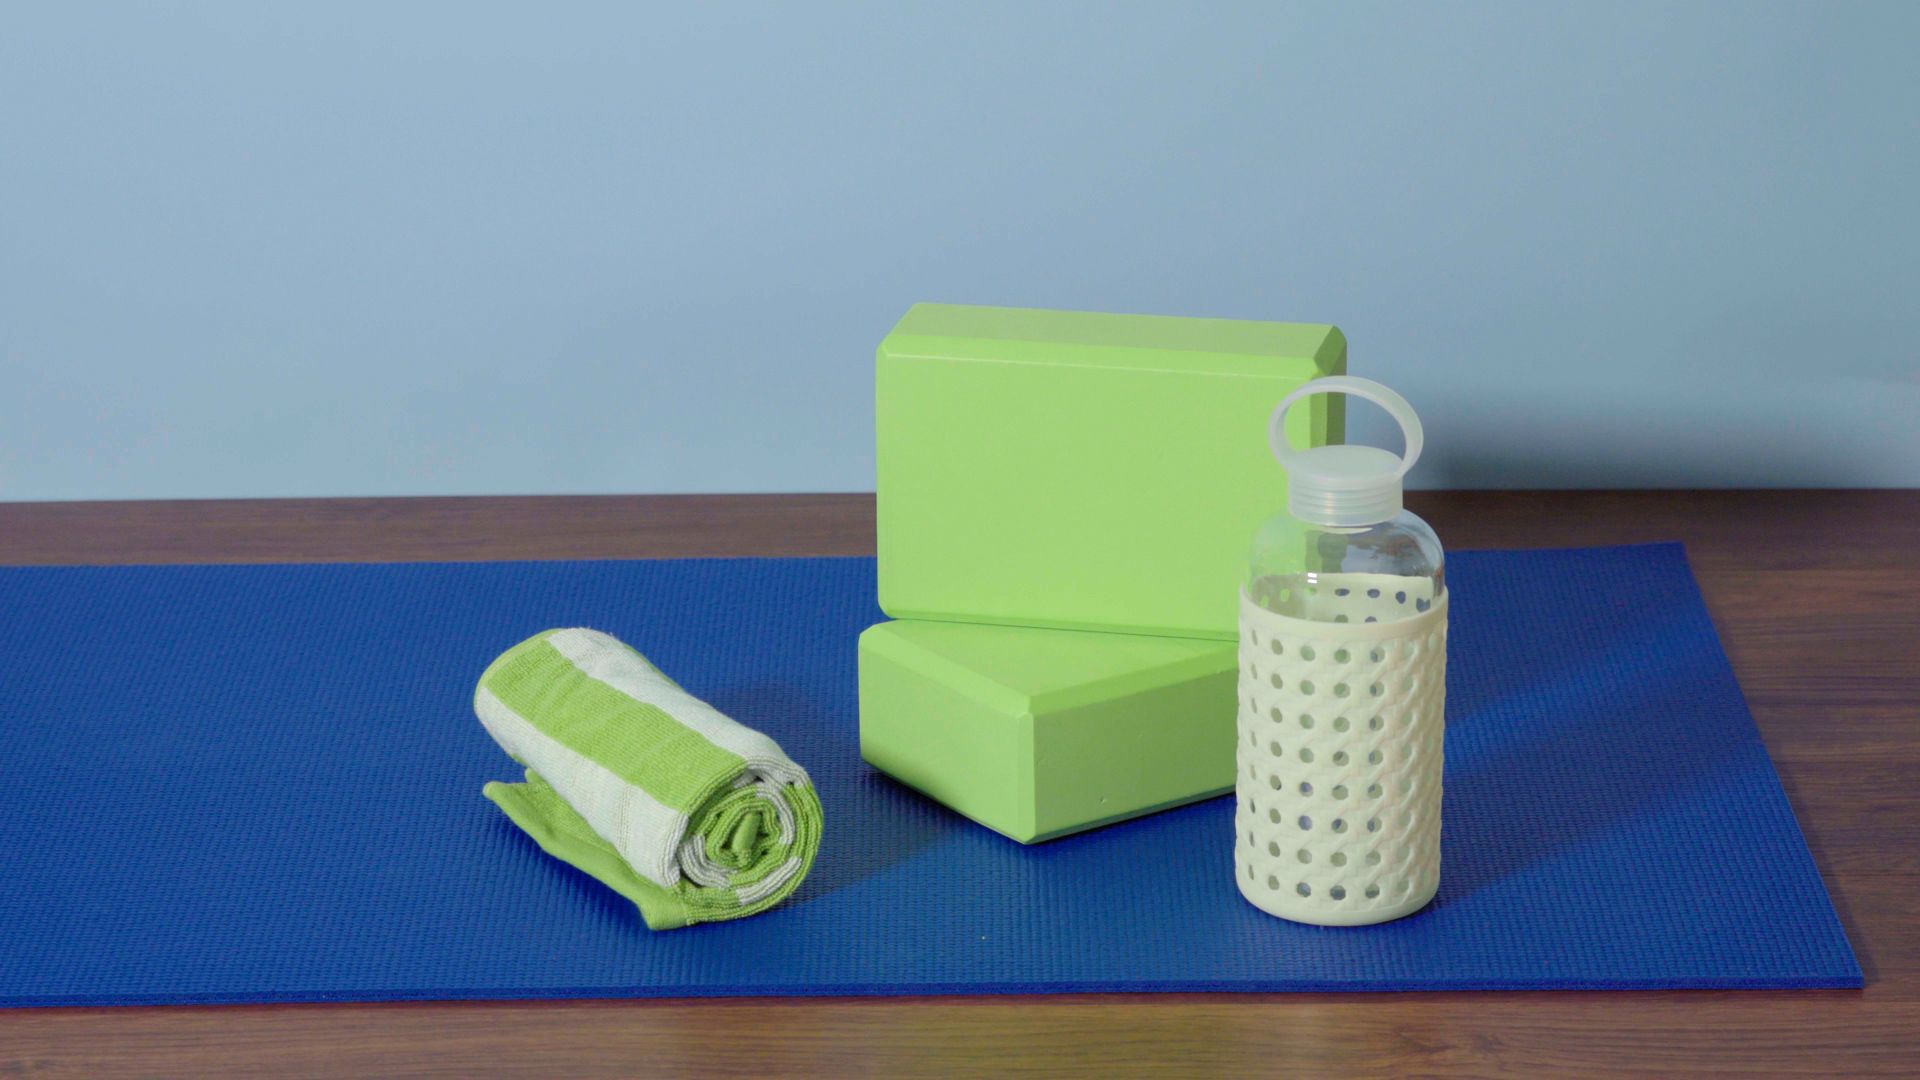 Tips to Care for Your Yoga Mat from Aurorae - The Organic Beauty